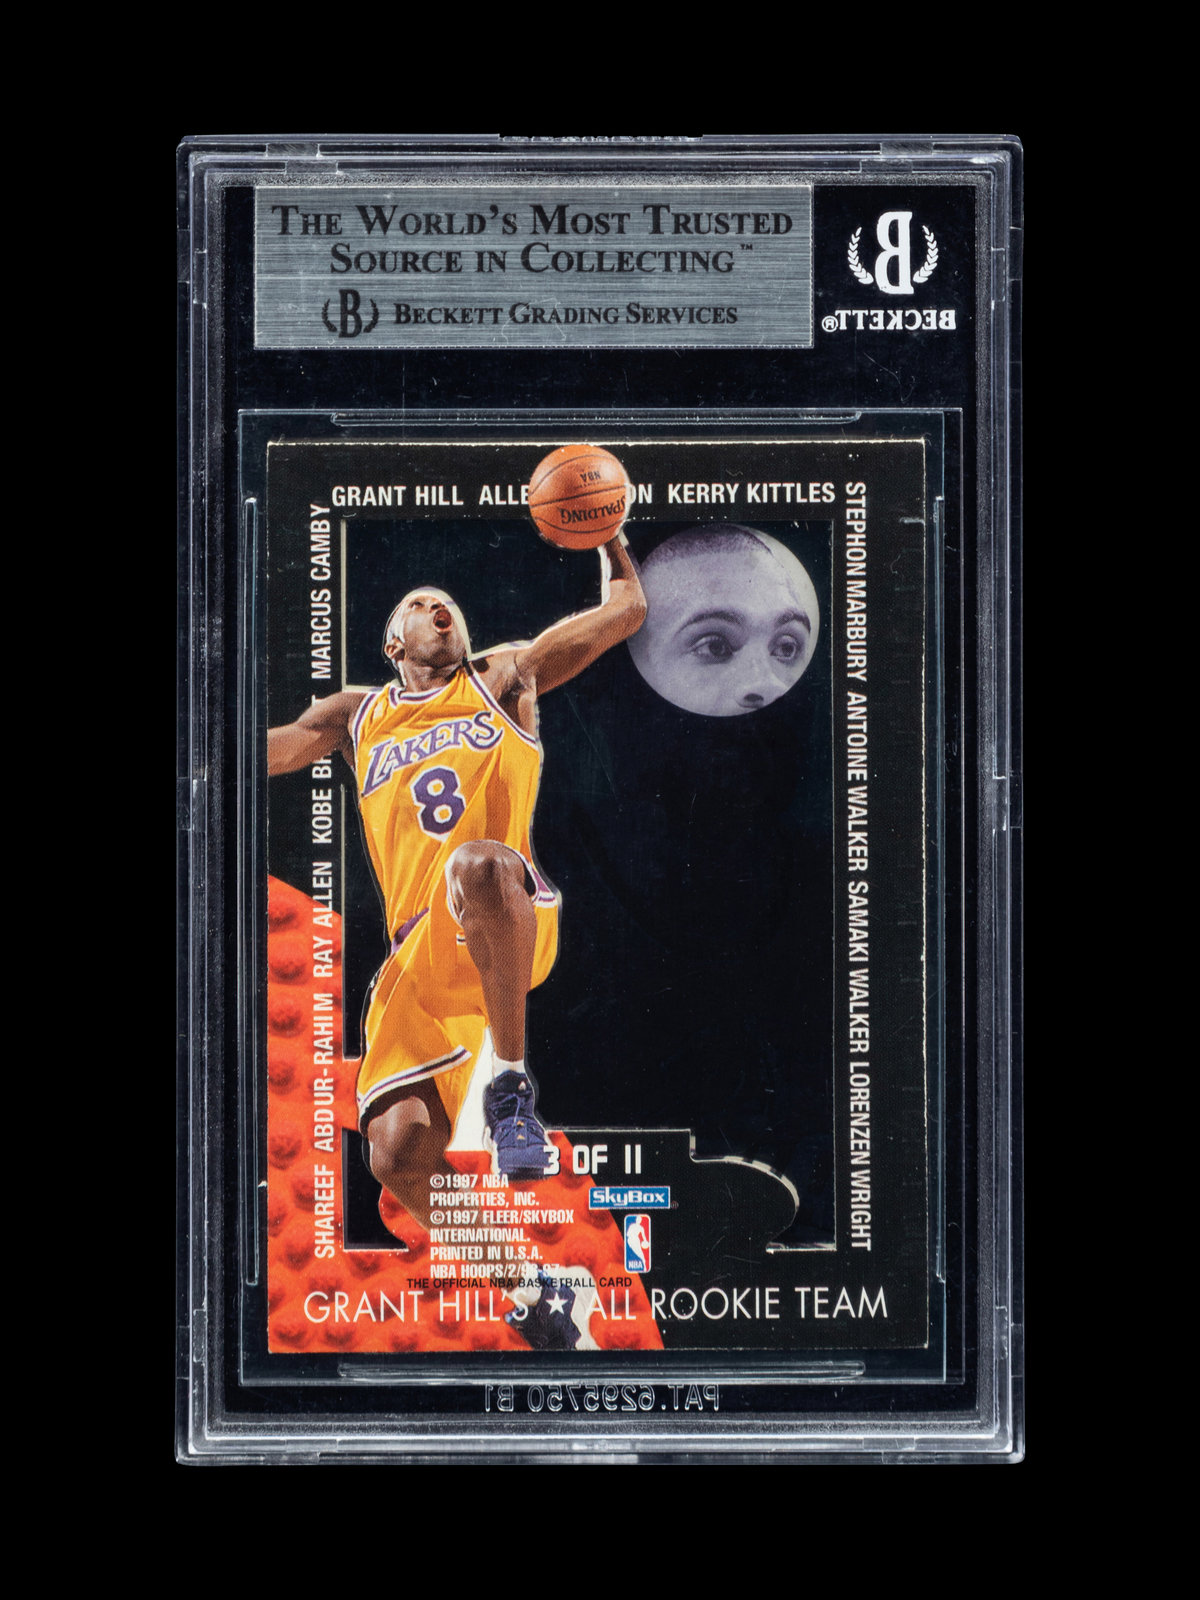 Sold at Auction: 1996-97 HOOPS KOBE BRYANT ROOKIE CARD